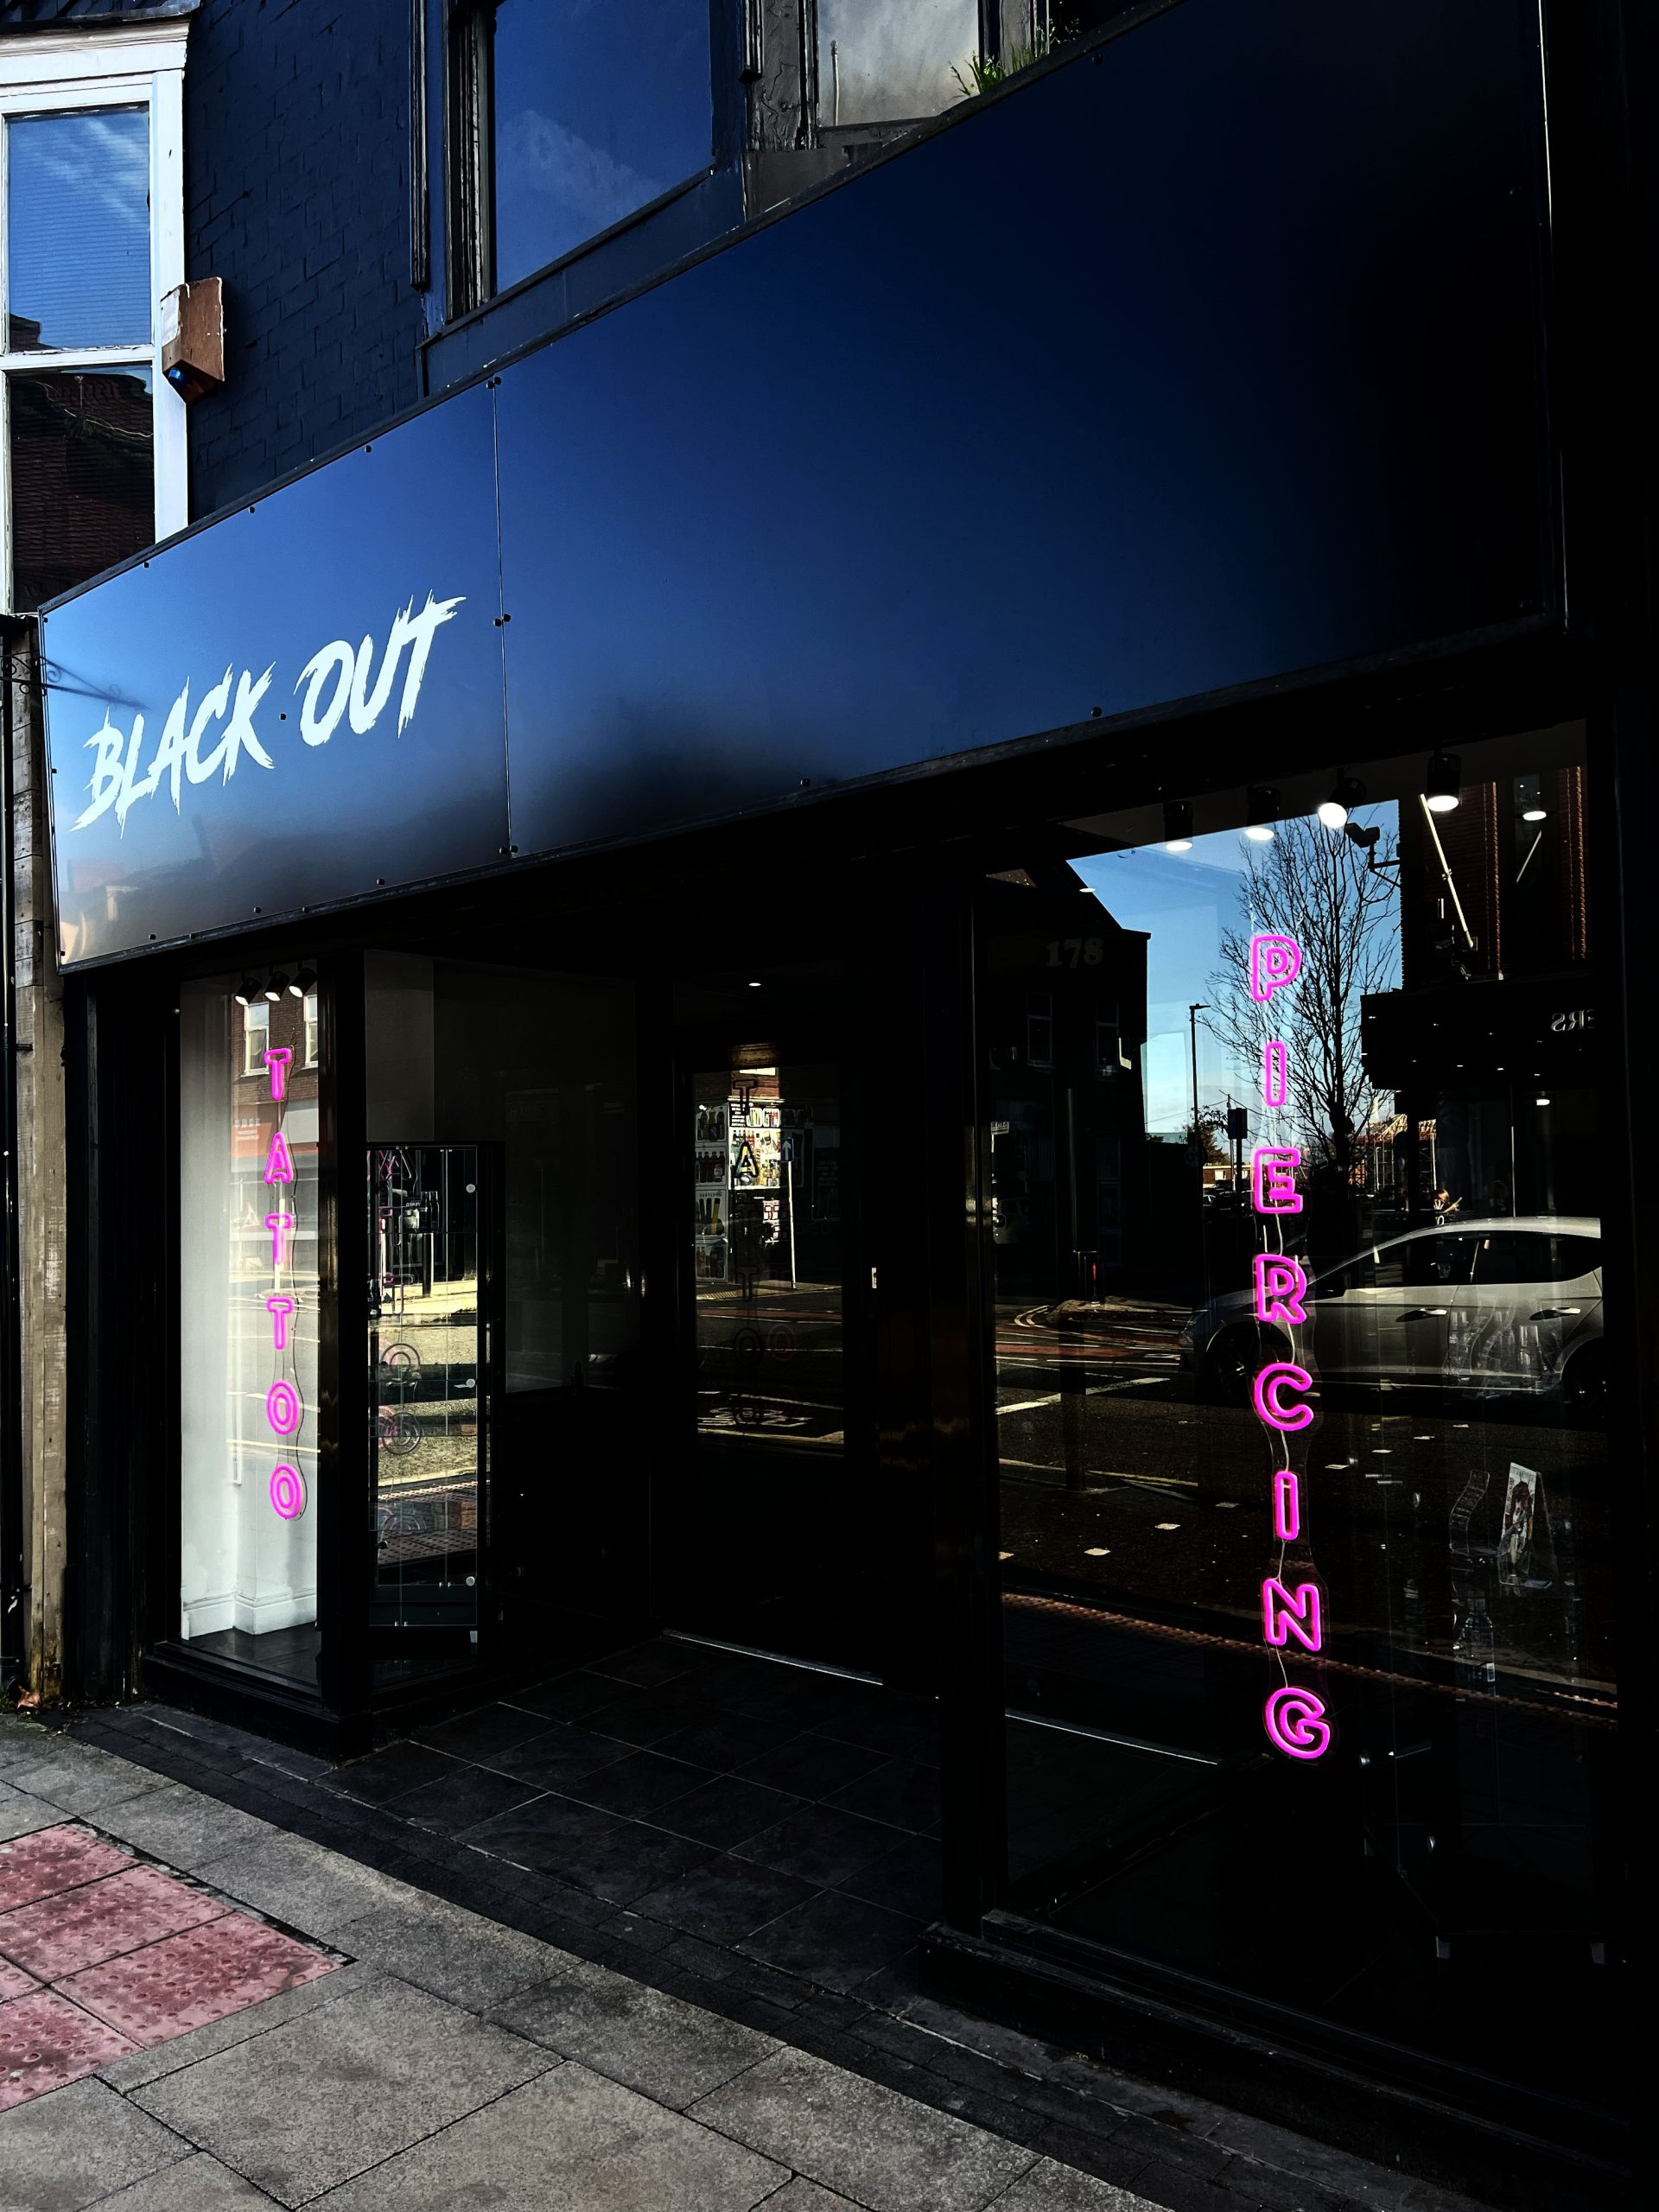 Blackout Tattoo & Piercing Academy based on Linthorpe Road in Middlesbrough, North Yorkshire.